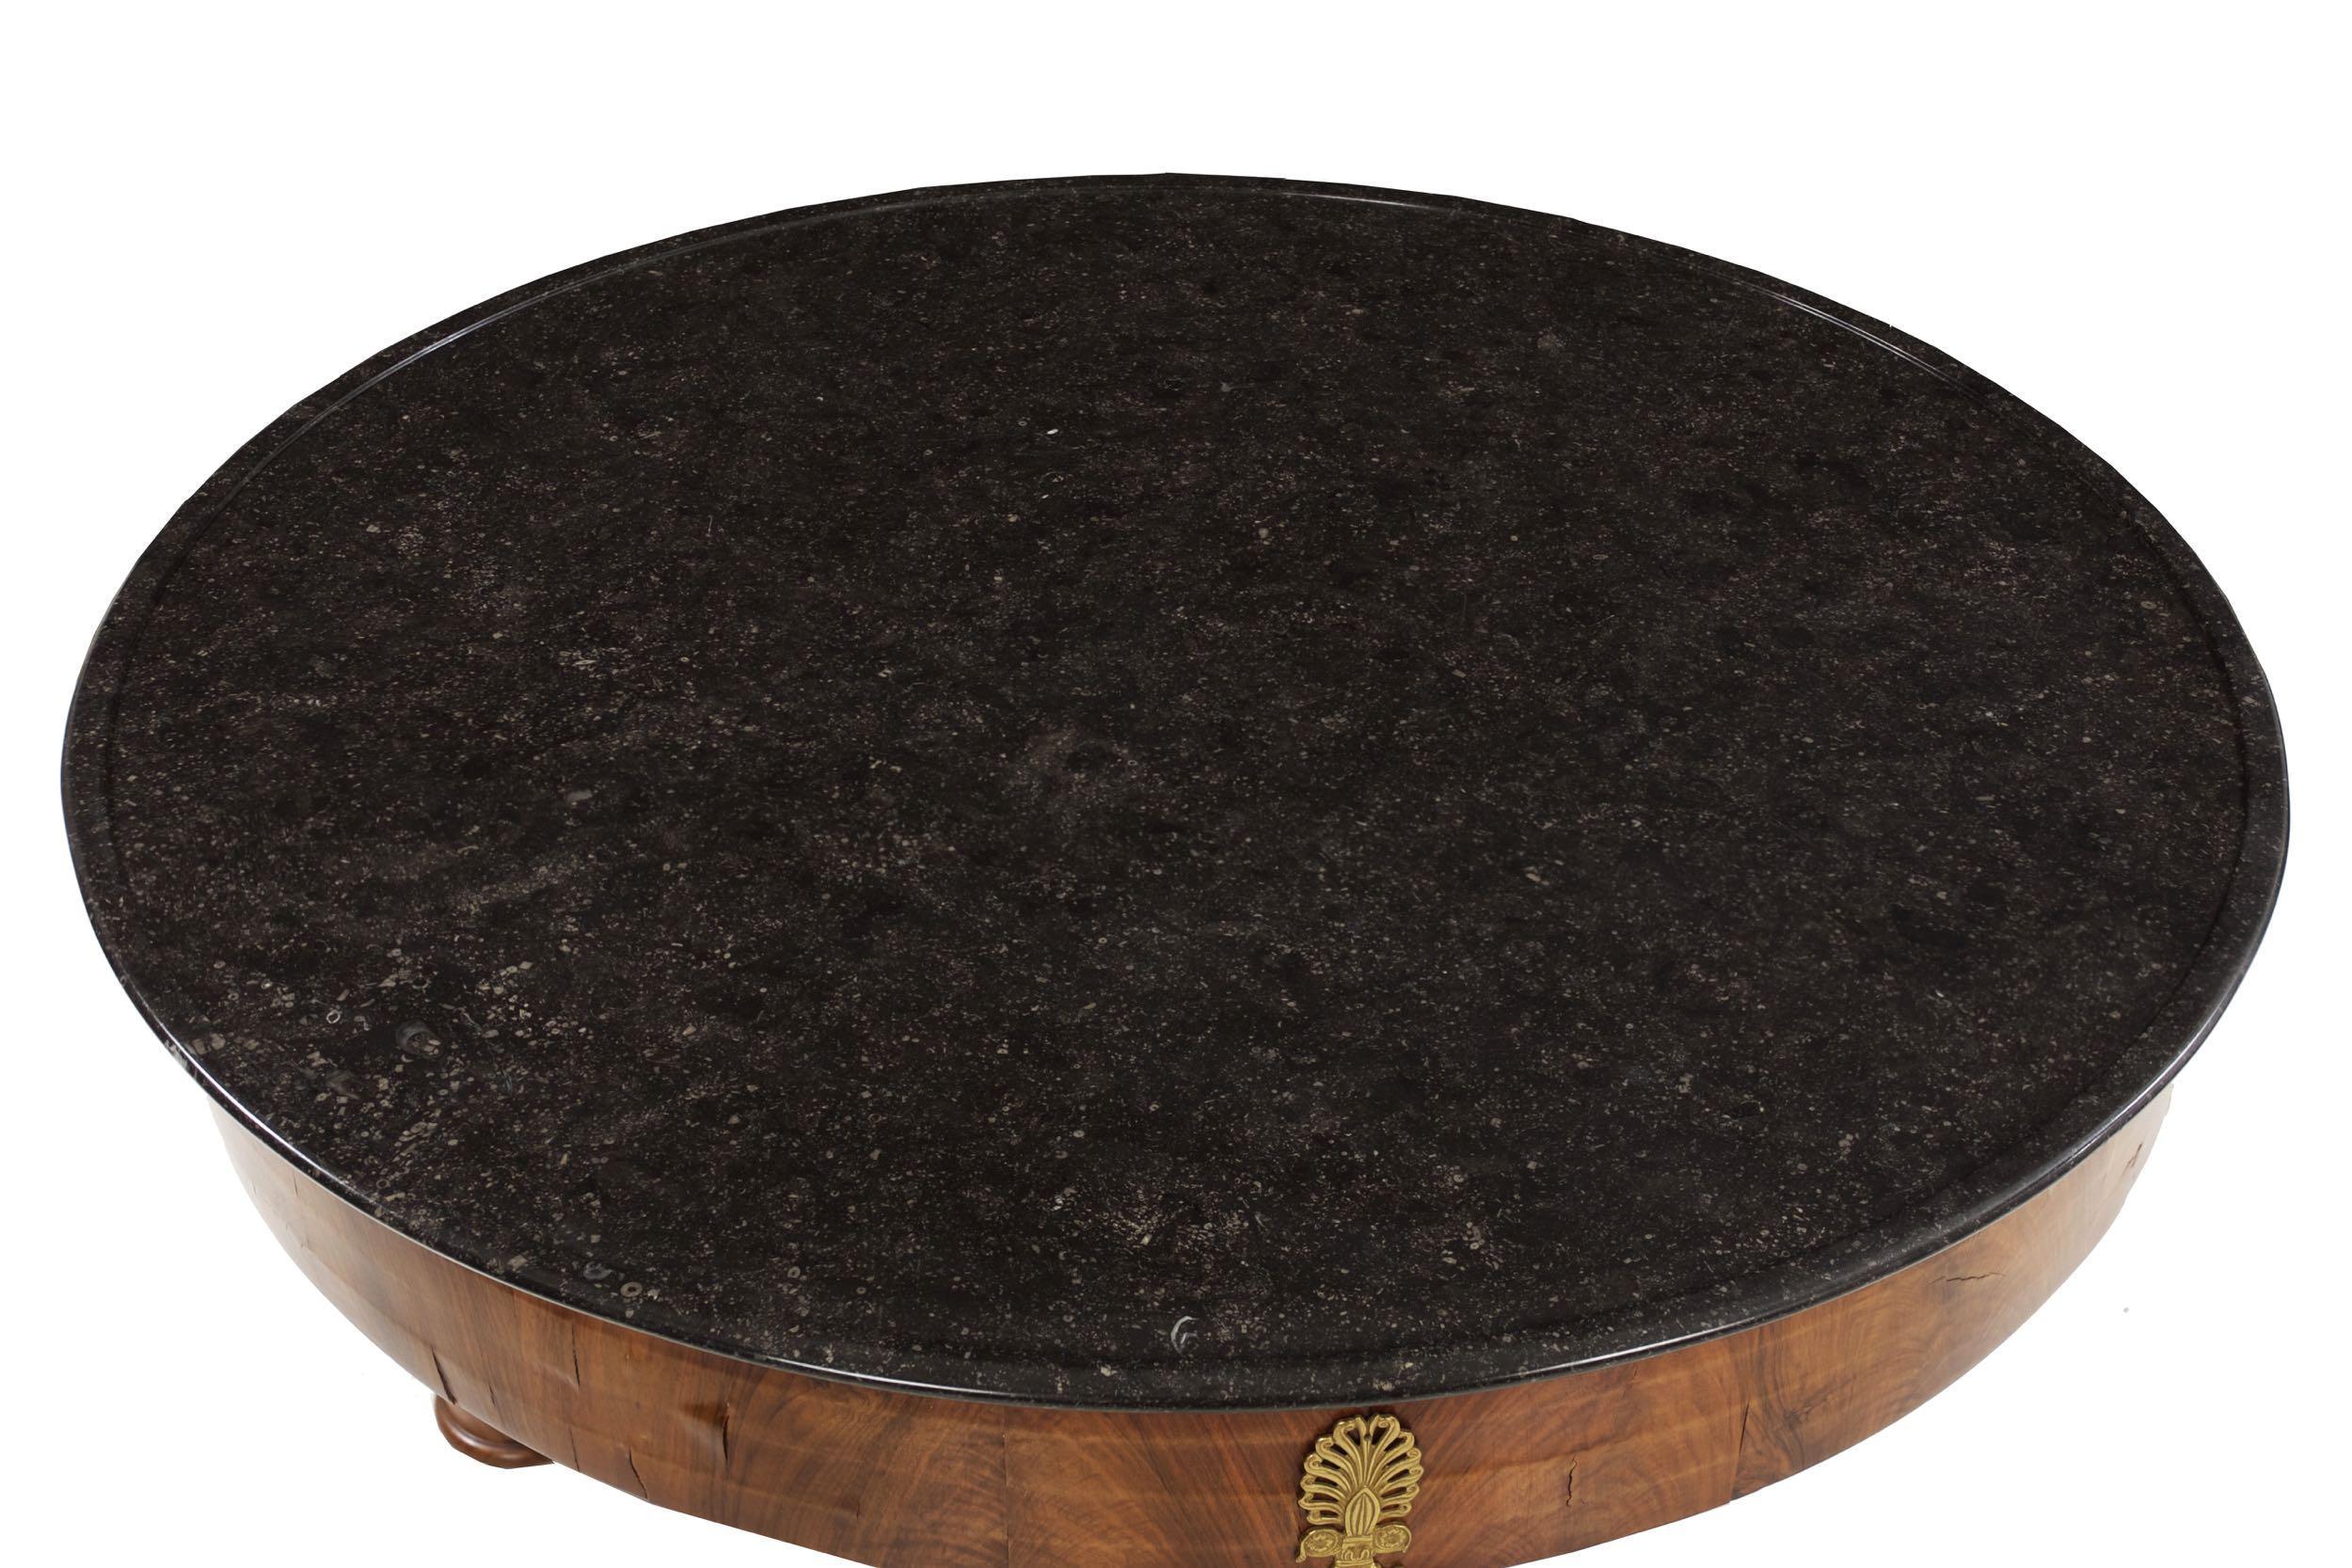 French Empire Antique Burl Walnut Center Table with Black Marble Top, circa 1815 For Sale 2